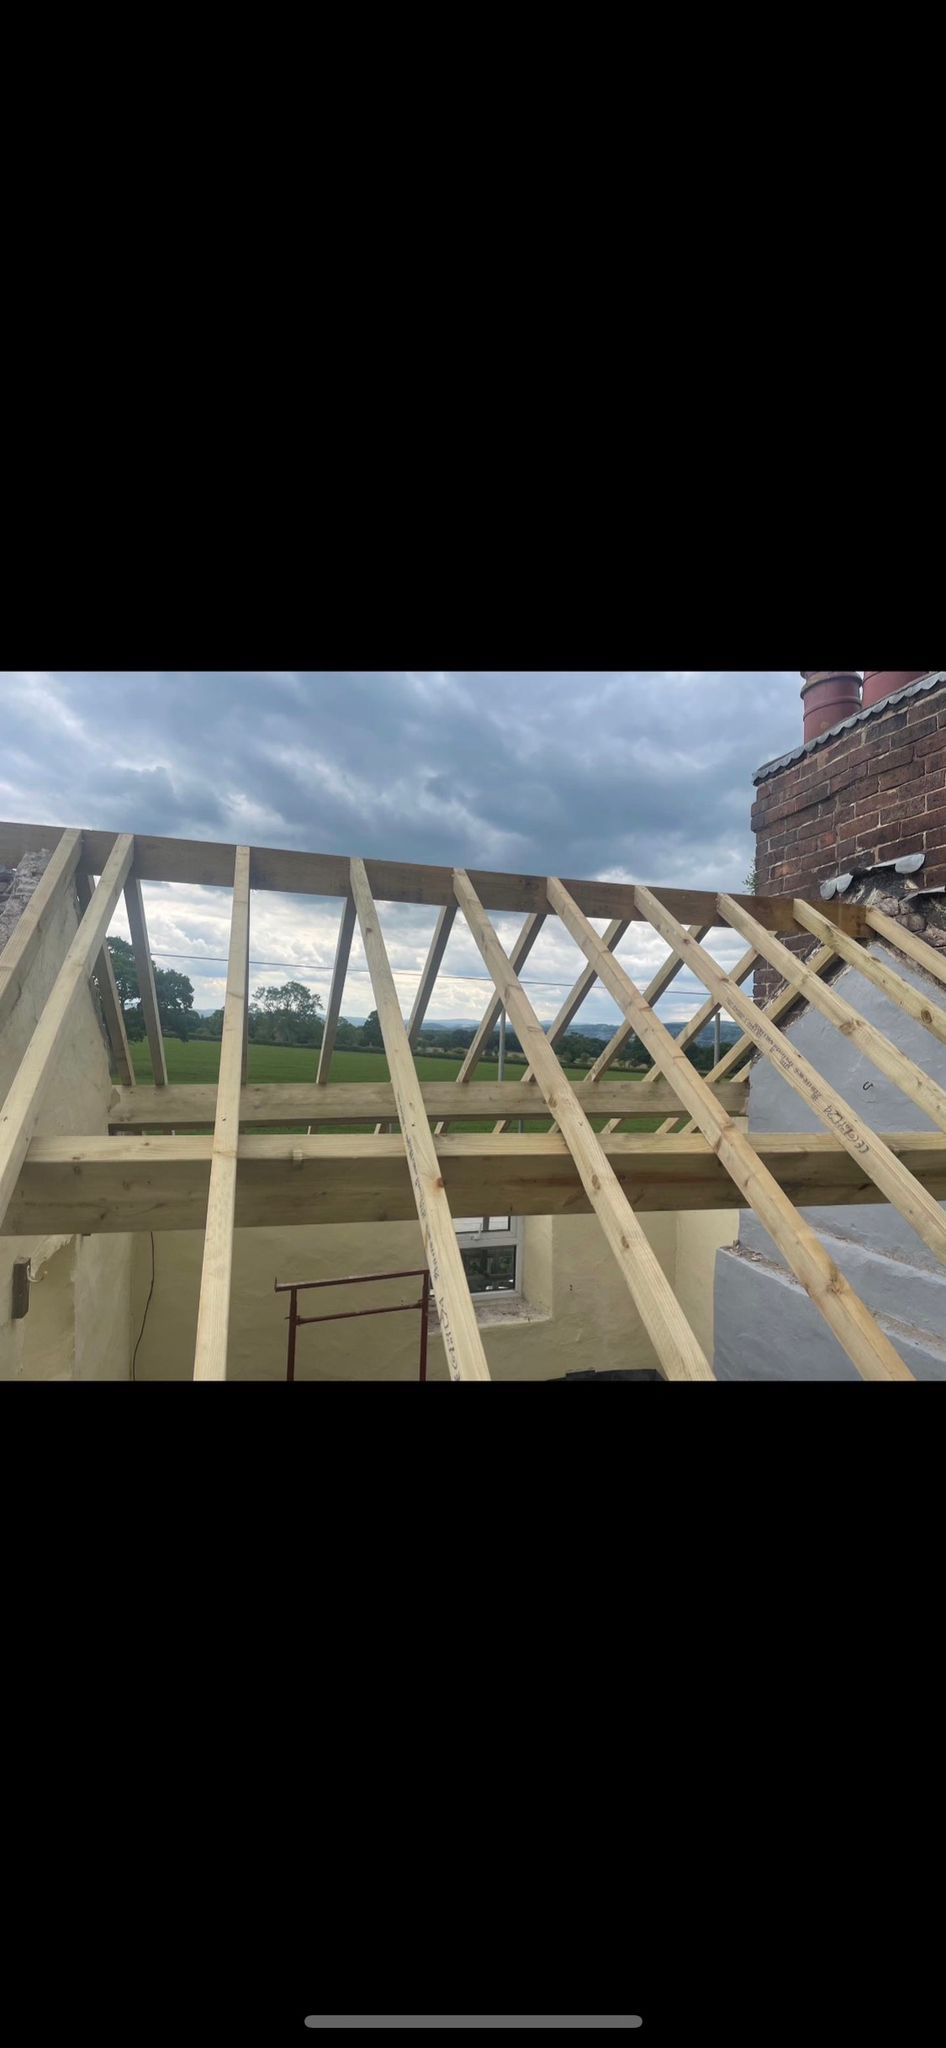 Timberwork Roof Contractors Tallarn Green, SY14 - DD Roofing